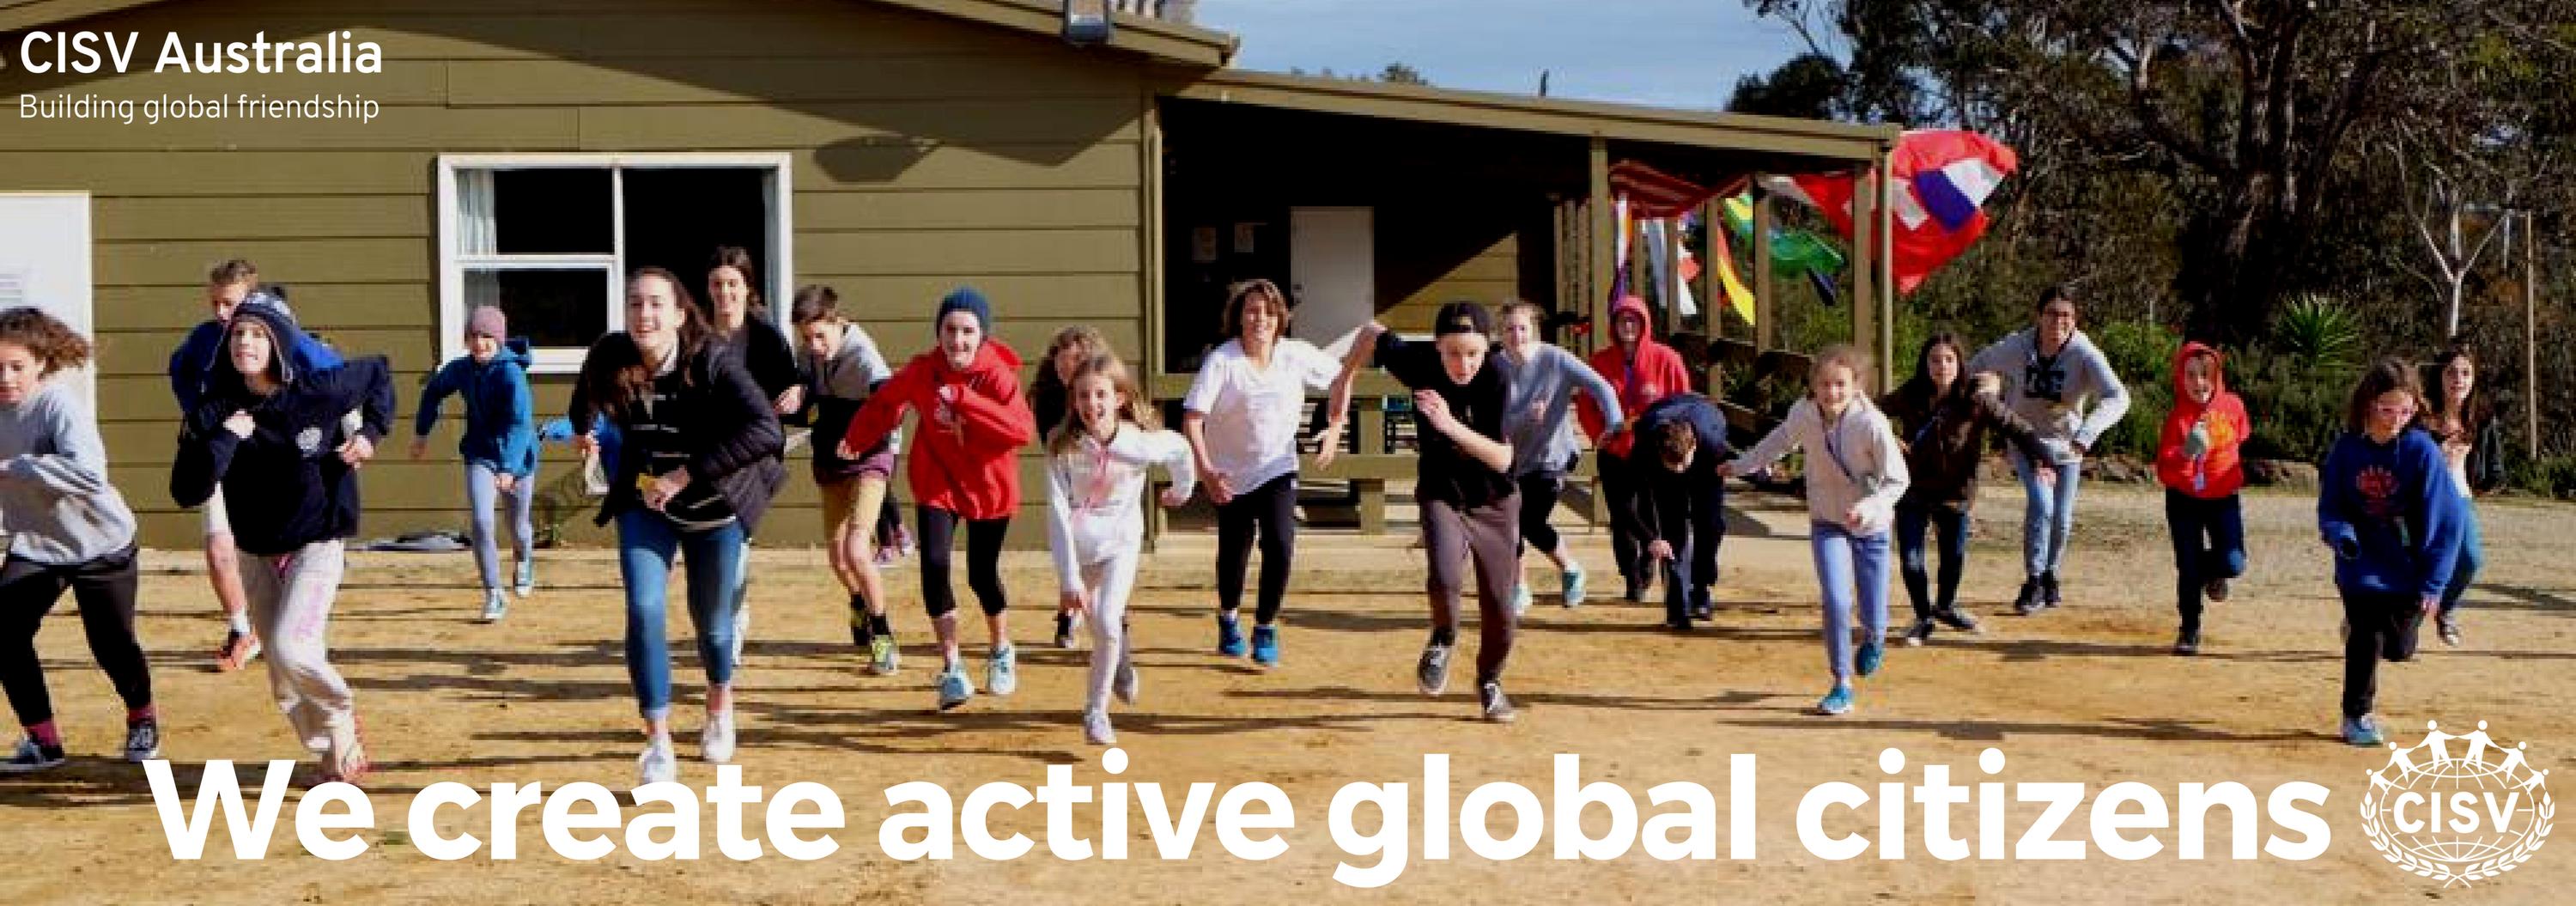 We create active global citizens